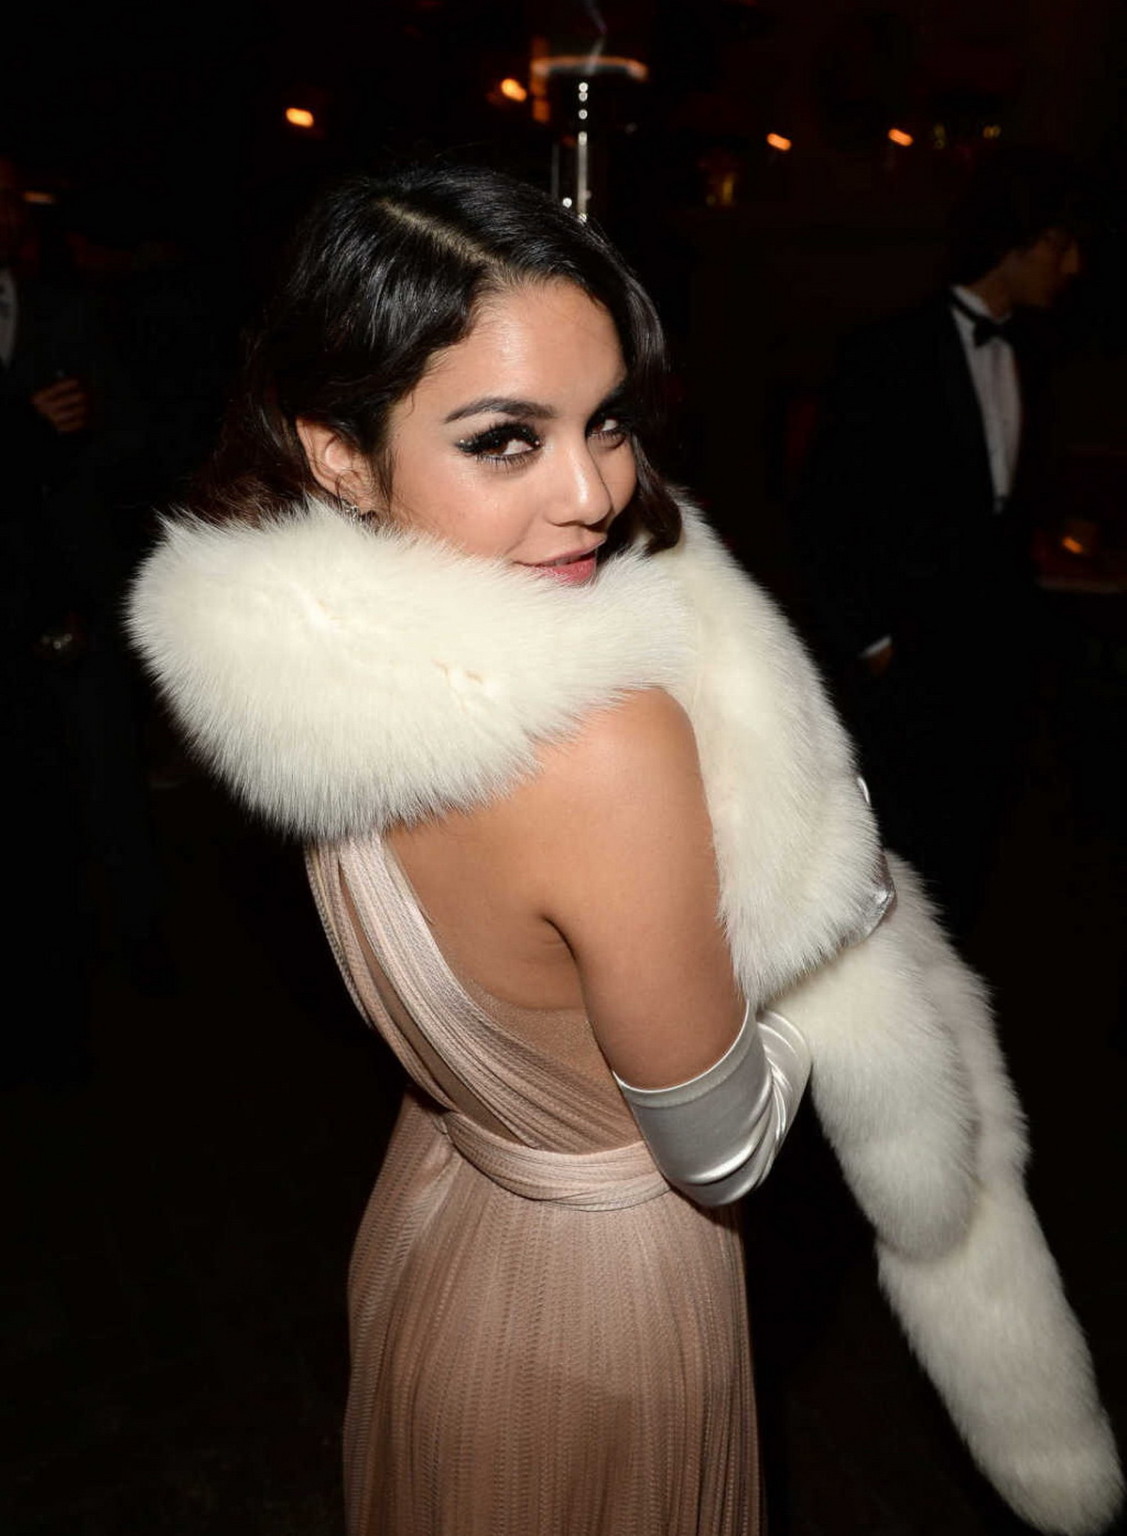 Vanessa Hudgens Braless Showing Huge Cleavage At Her 25th Birthday Party At No V